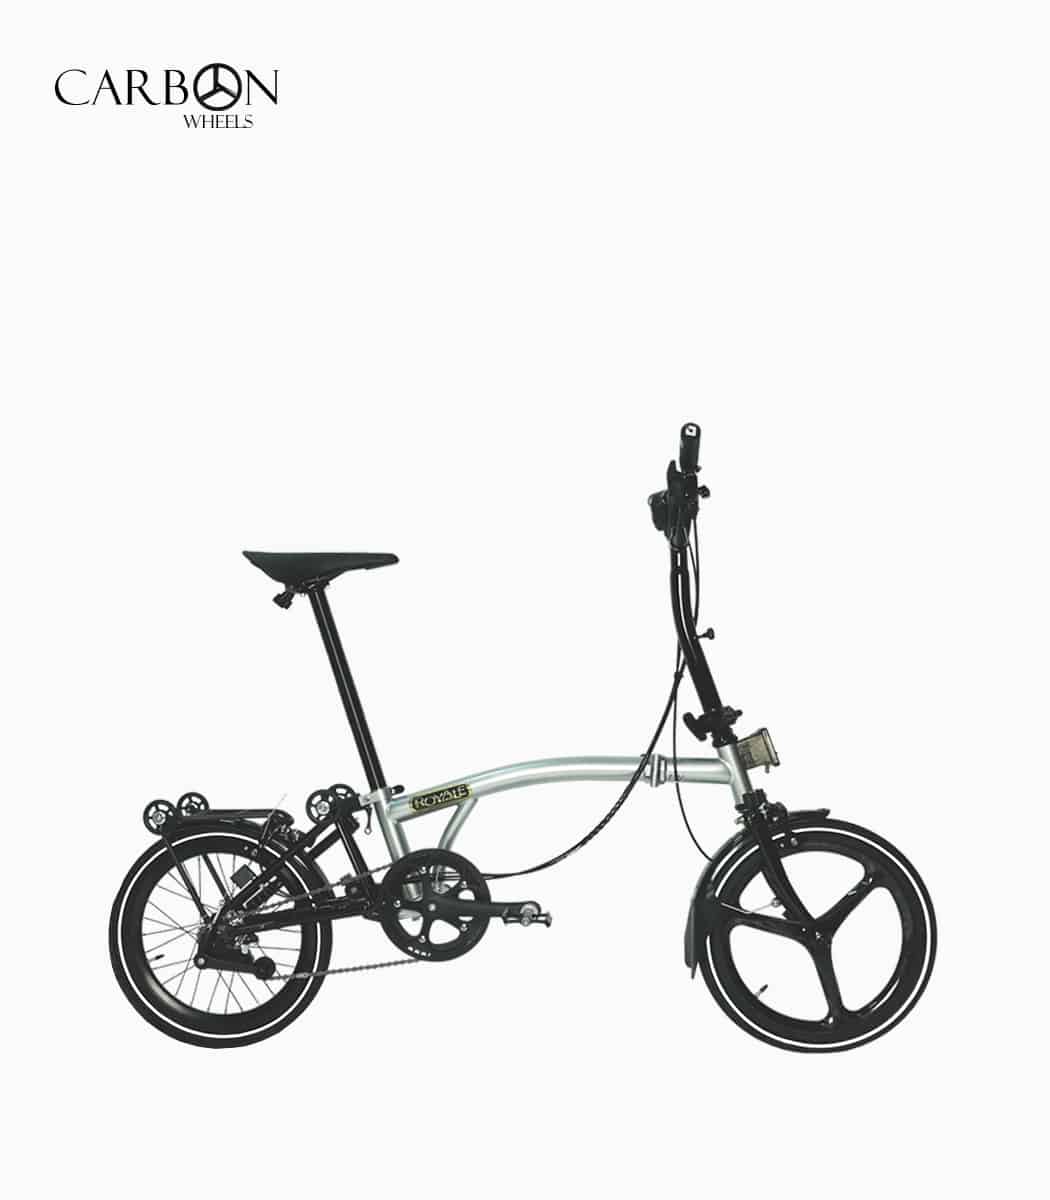 ROYALE Carbon M6 (SILVER) foldable bicycle right